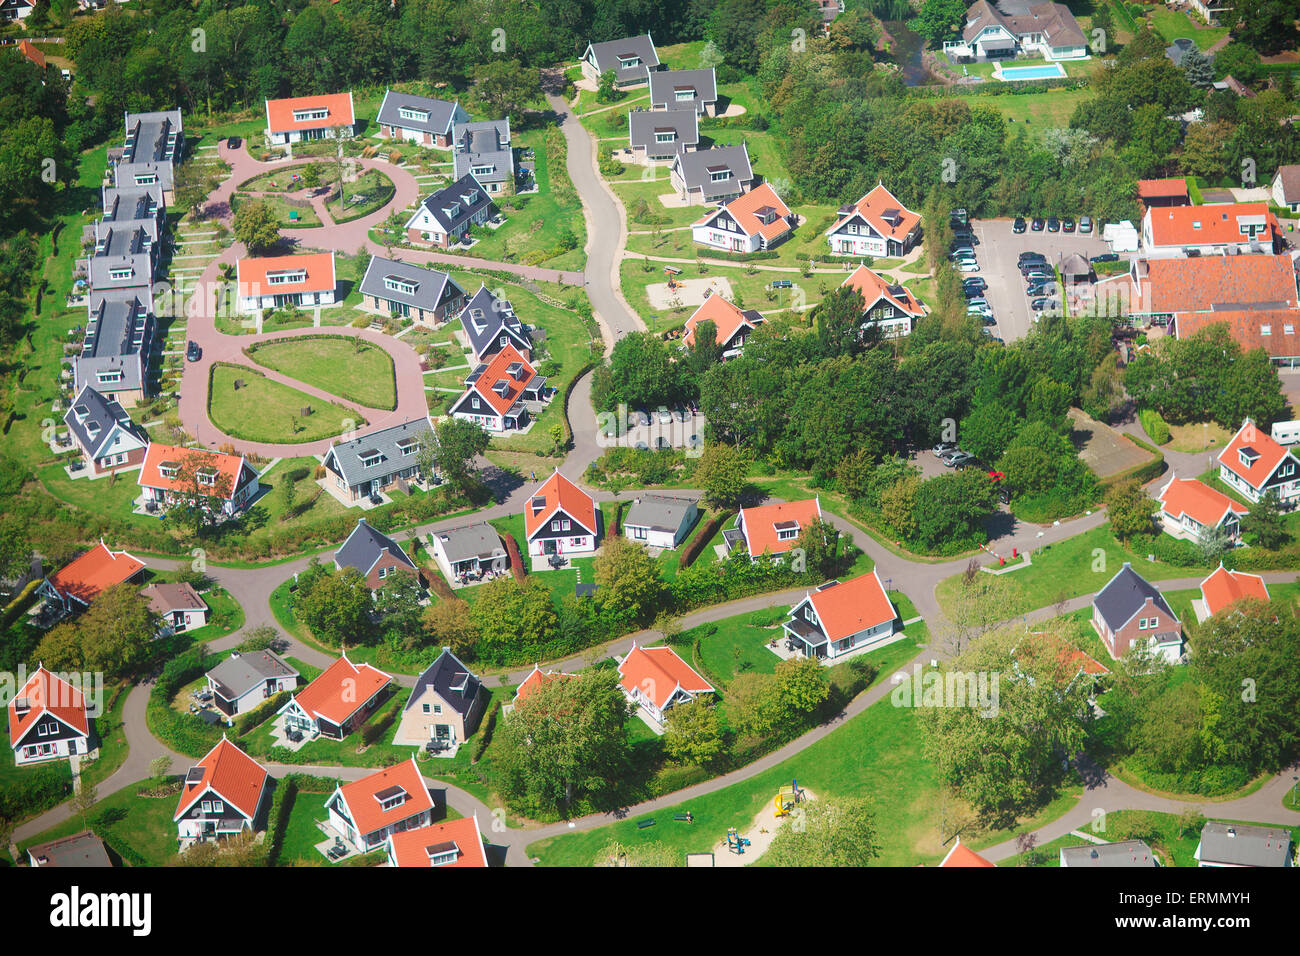 Aerial view of a residential community, village of Haamstede, Netherlands, photo taken from above during a helicopter from air Stock Photo